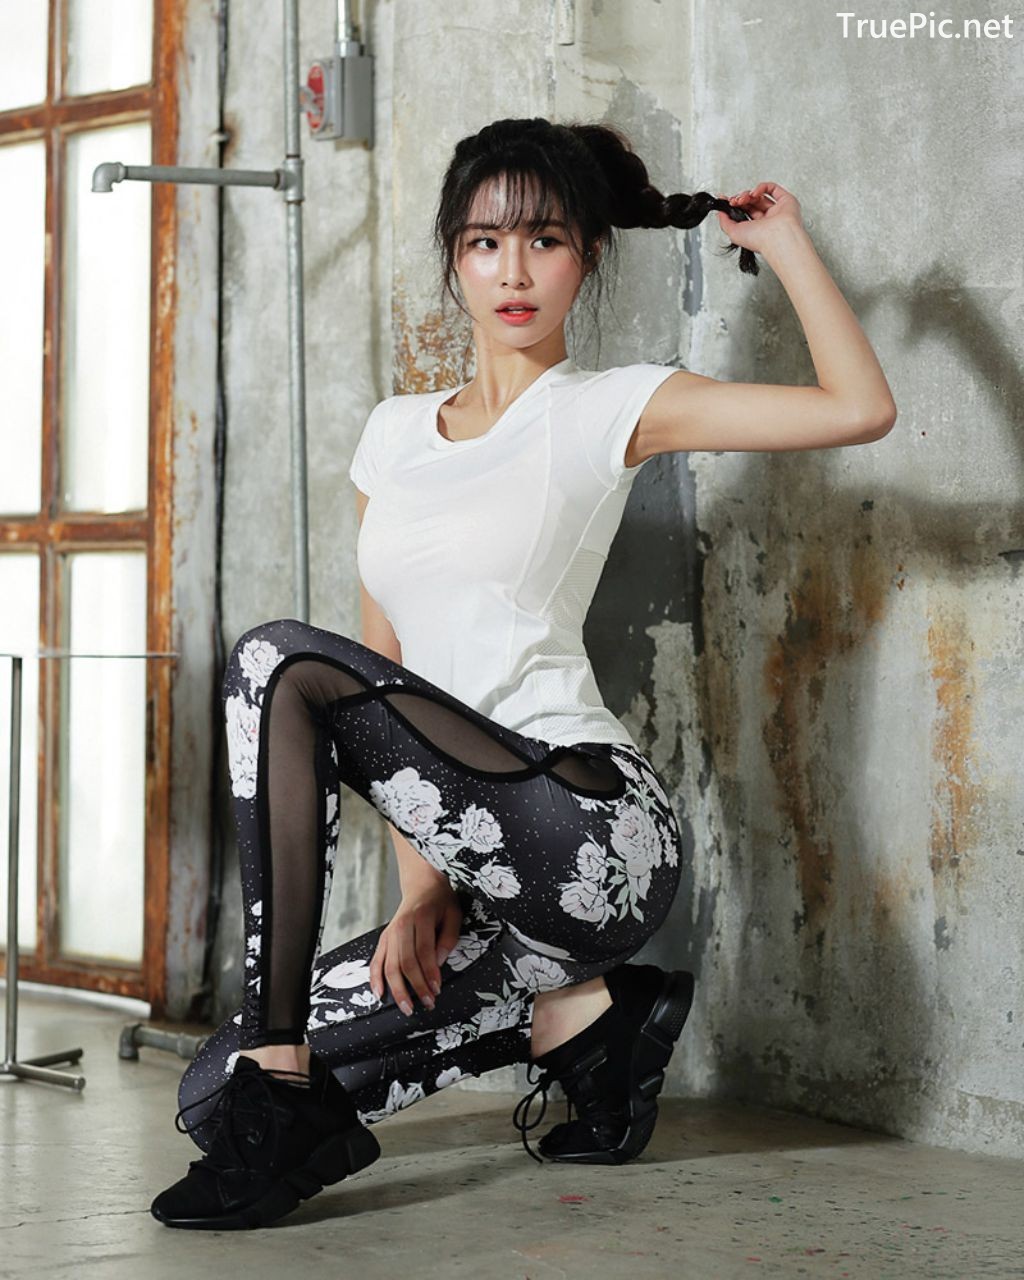 Image-Korean-Fashion-Model-Ju-Woo-Fitness-Set-Collection-TruePic.net- Picture-141